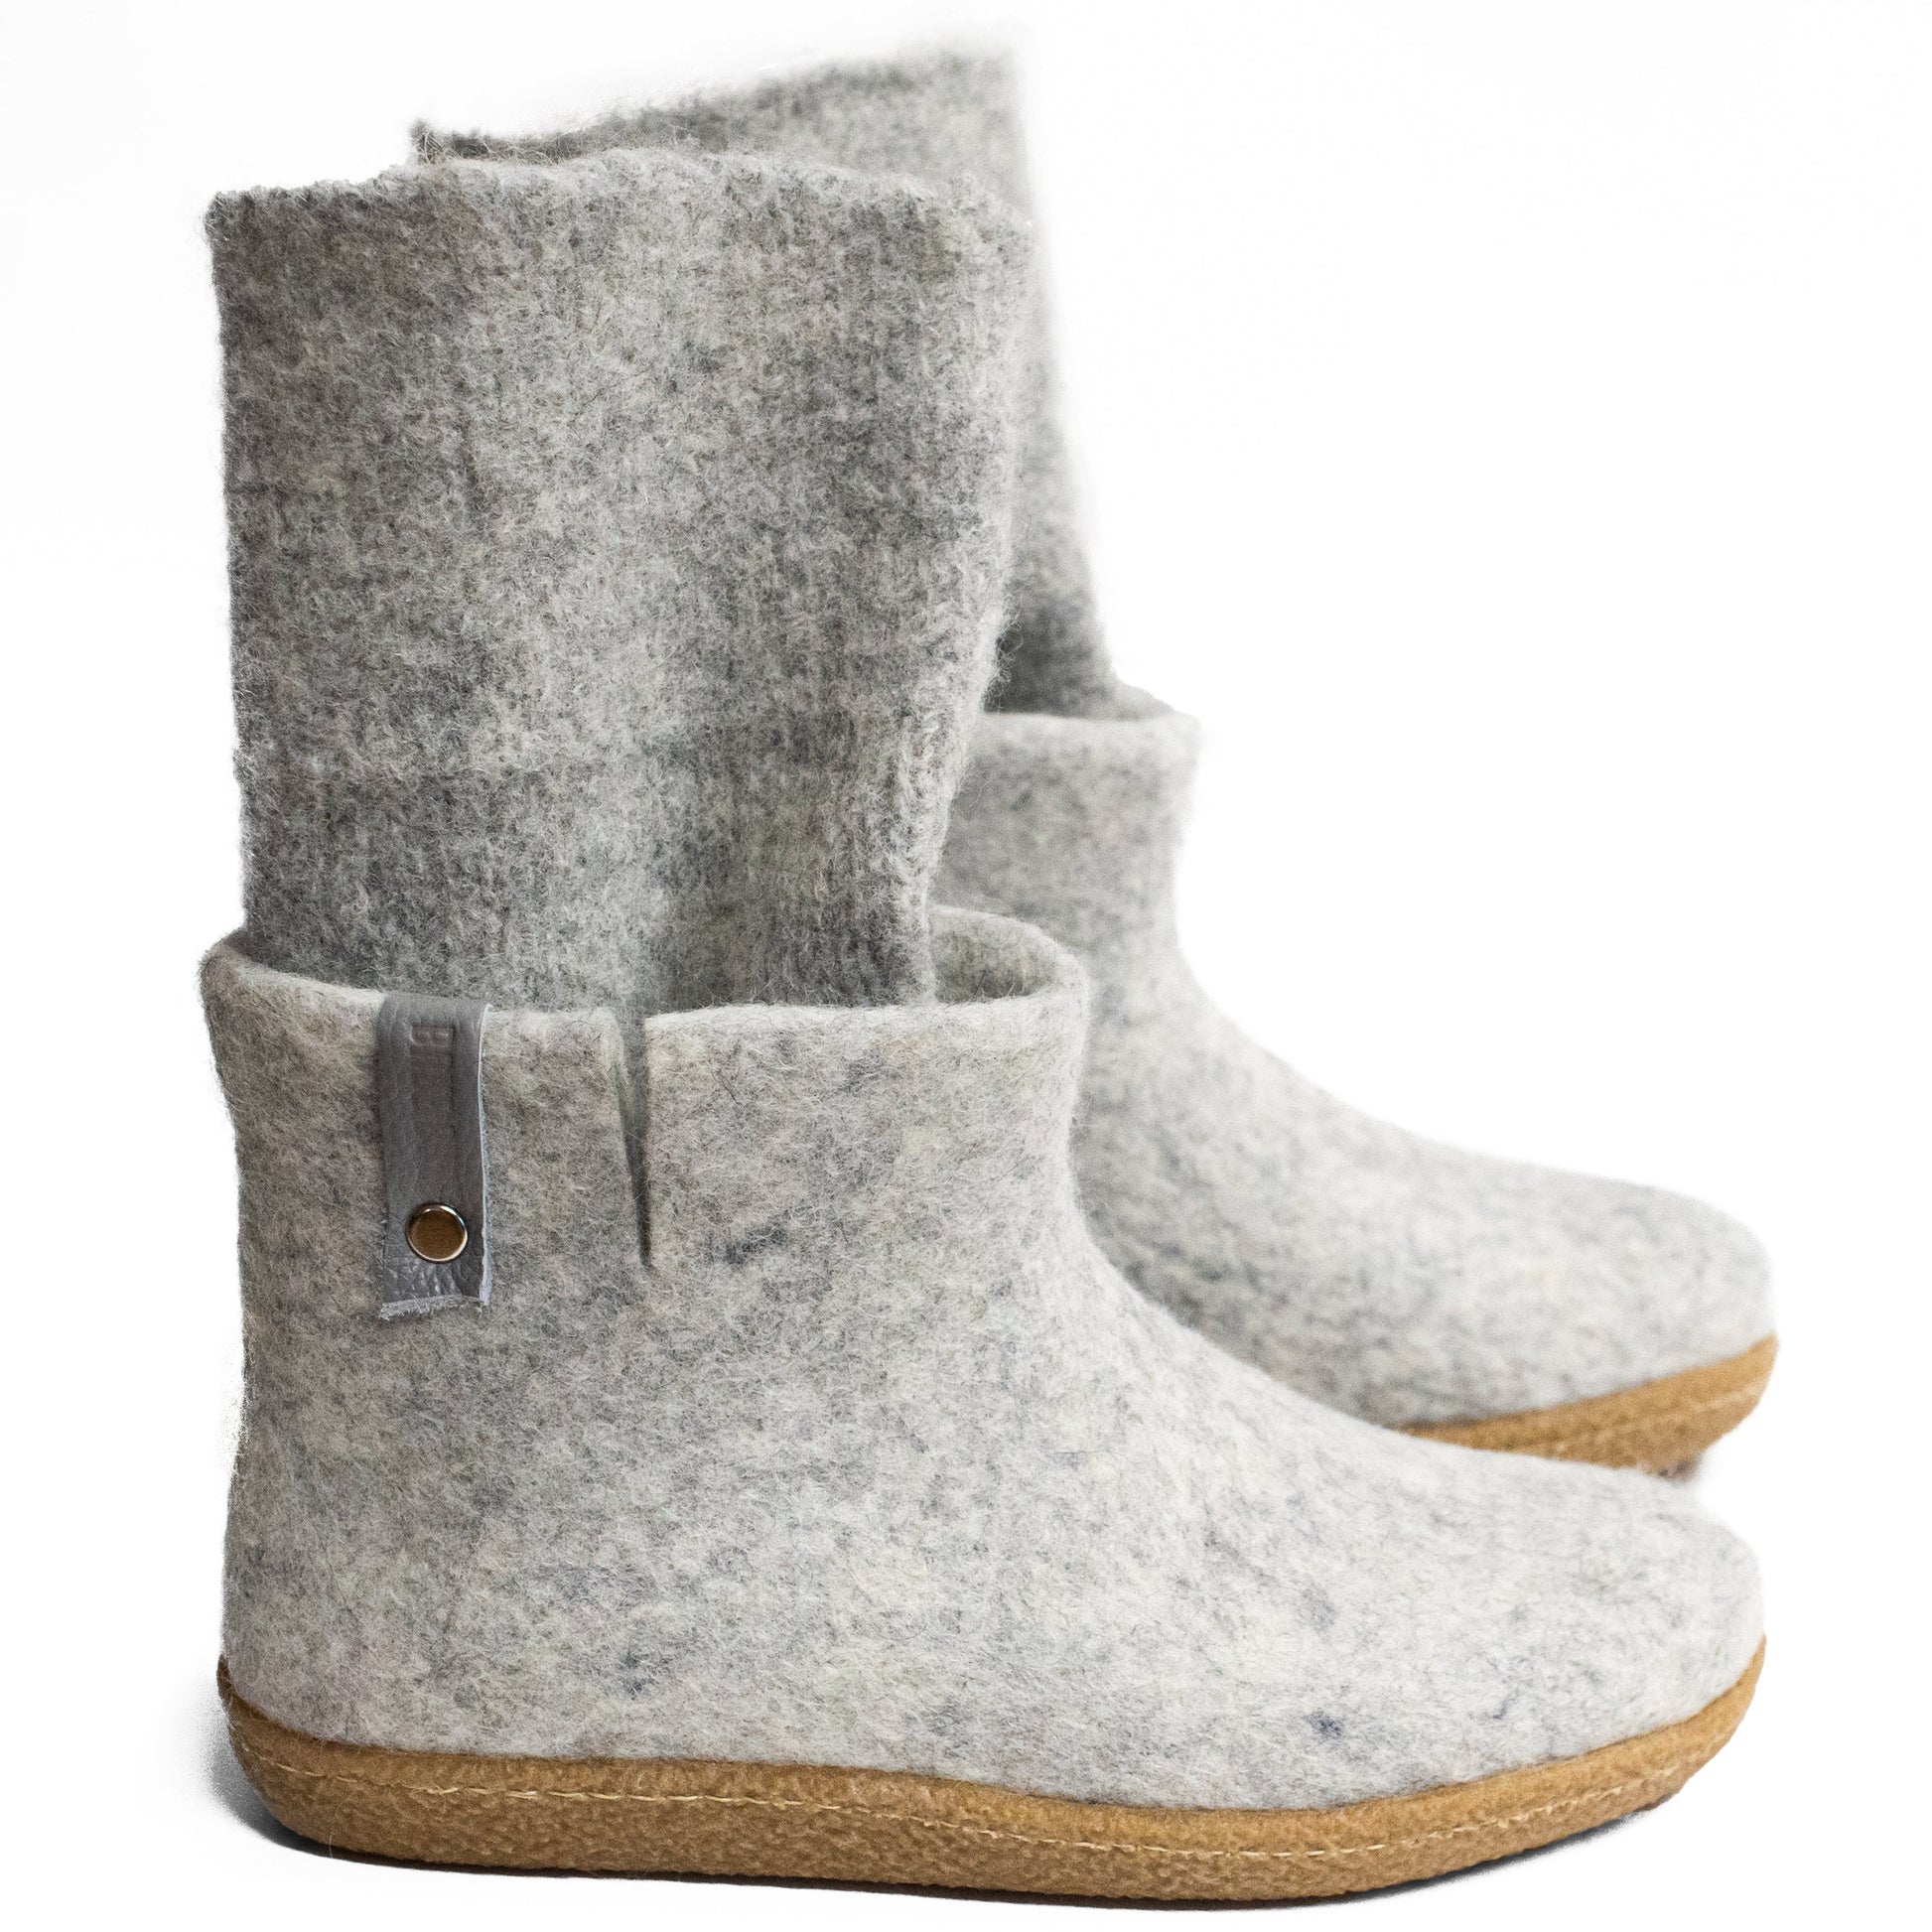 [felted_slippers],[wool_slippers], [burebure_slippers], [warm_wool_slippers], Women's WOOBOOTS with Knitted Leg Warmers, Bure Bure wool slippers